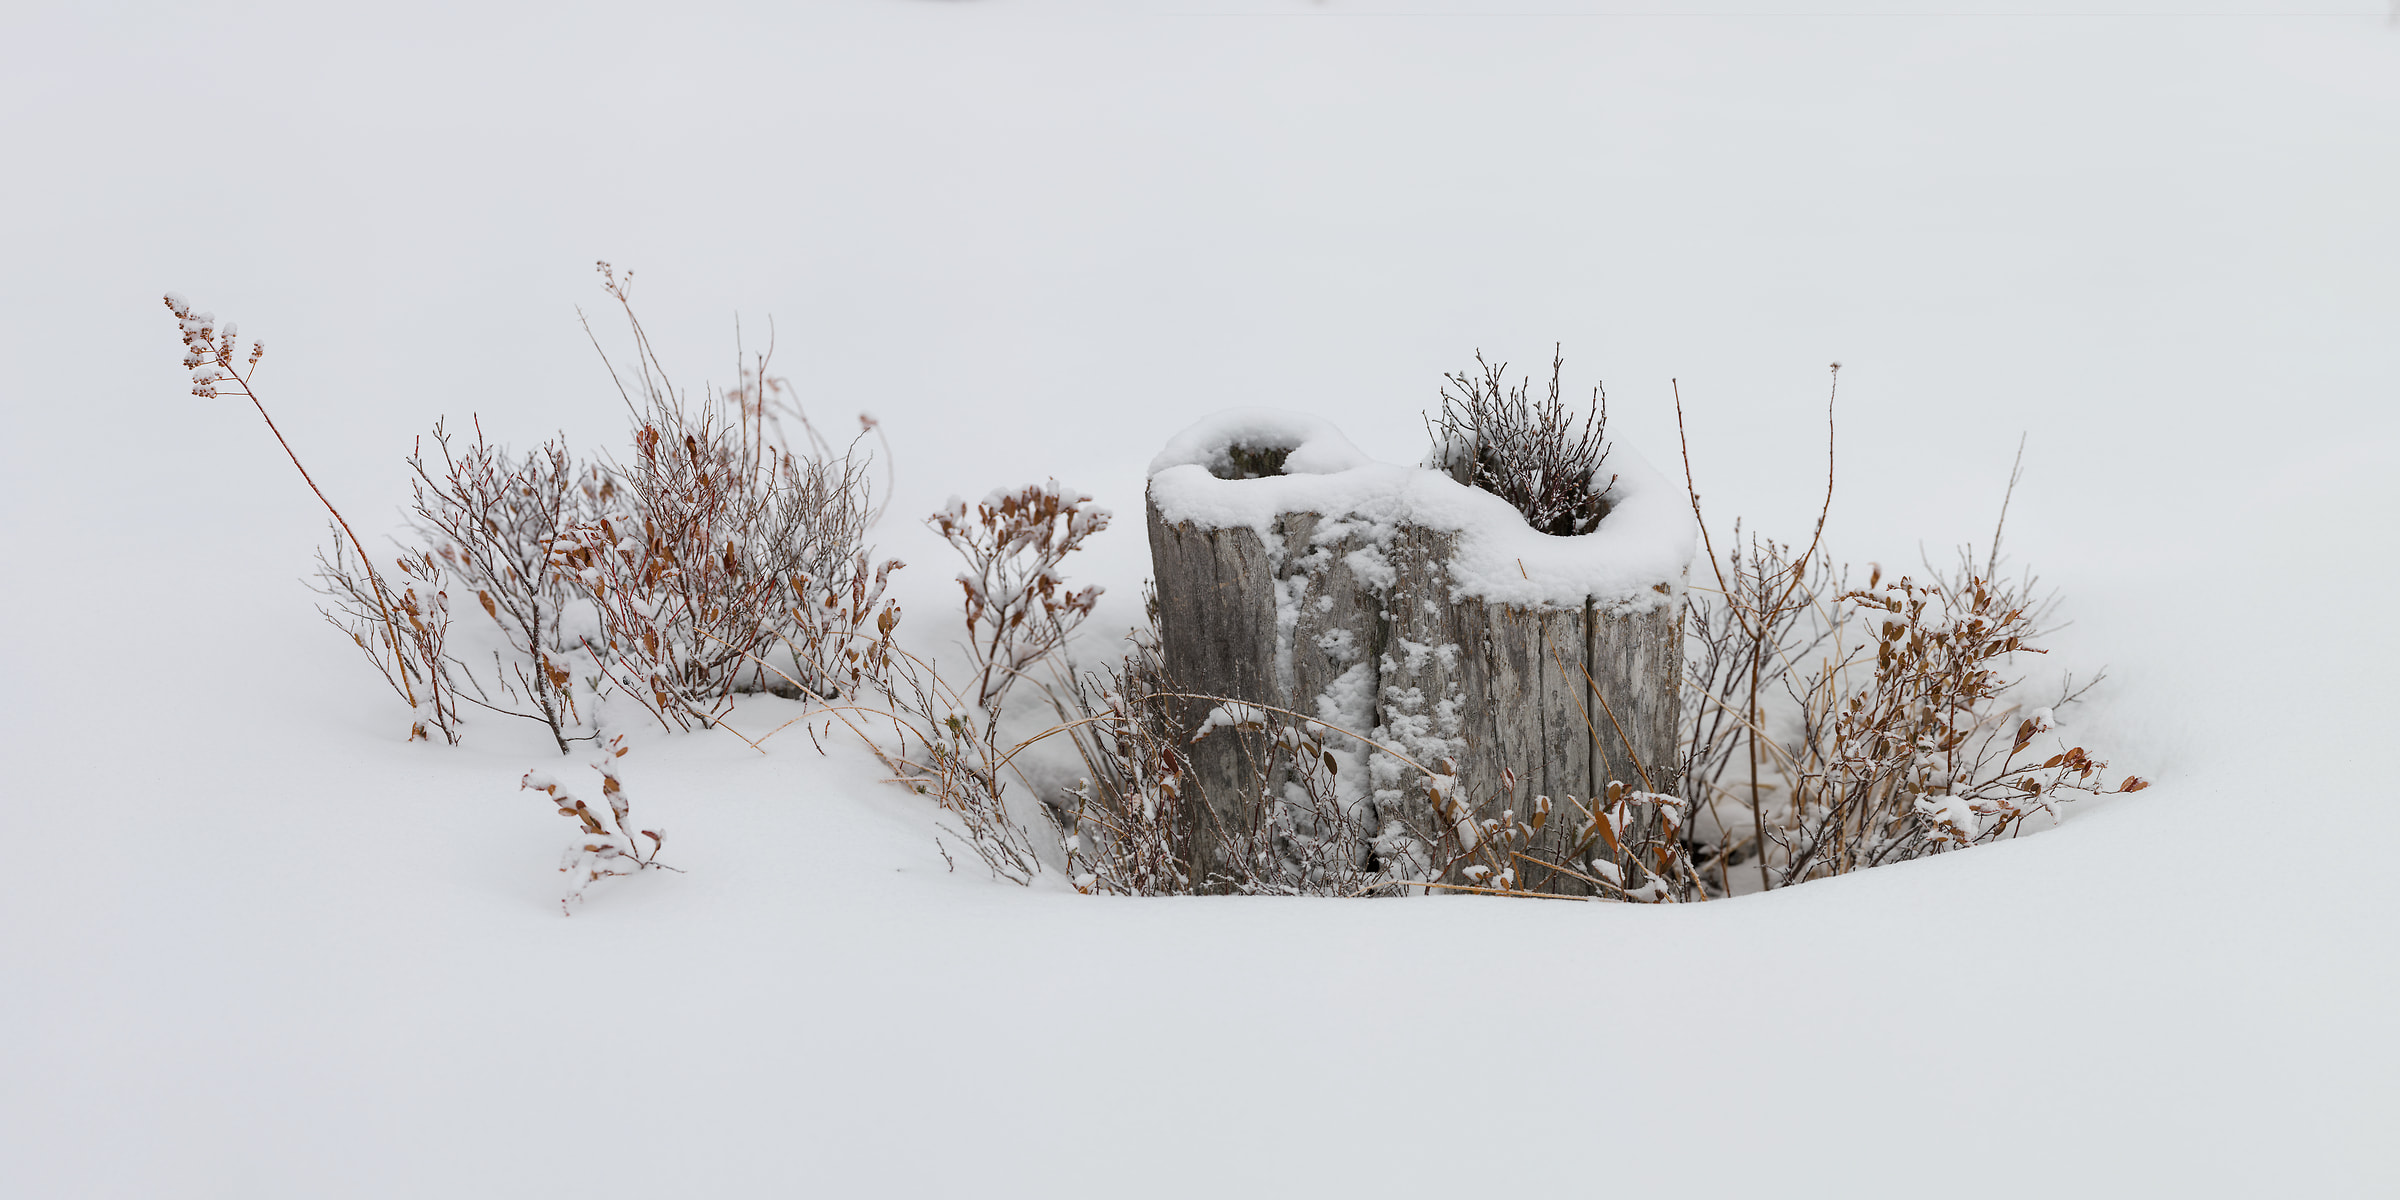 395 megapixels! A very high resolution, large-format photo print of bushes and a stump in the snow; fine art nature photograph created by Aaron Priest on Golden Road in Maine, New England.